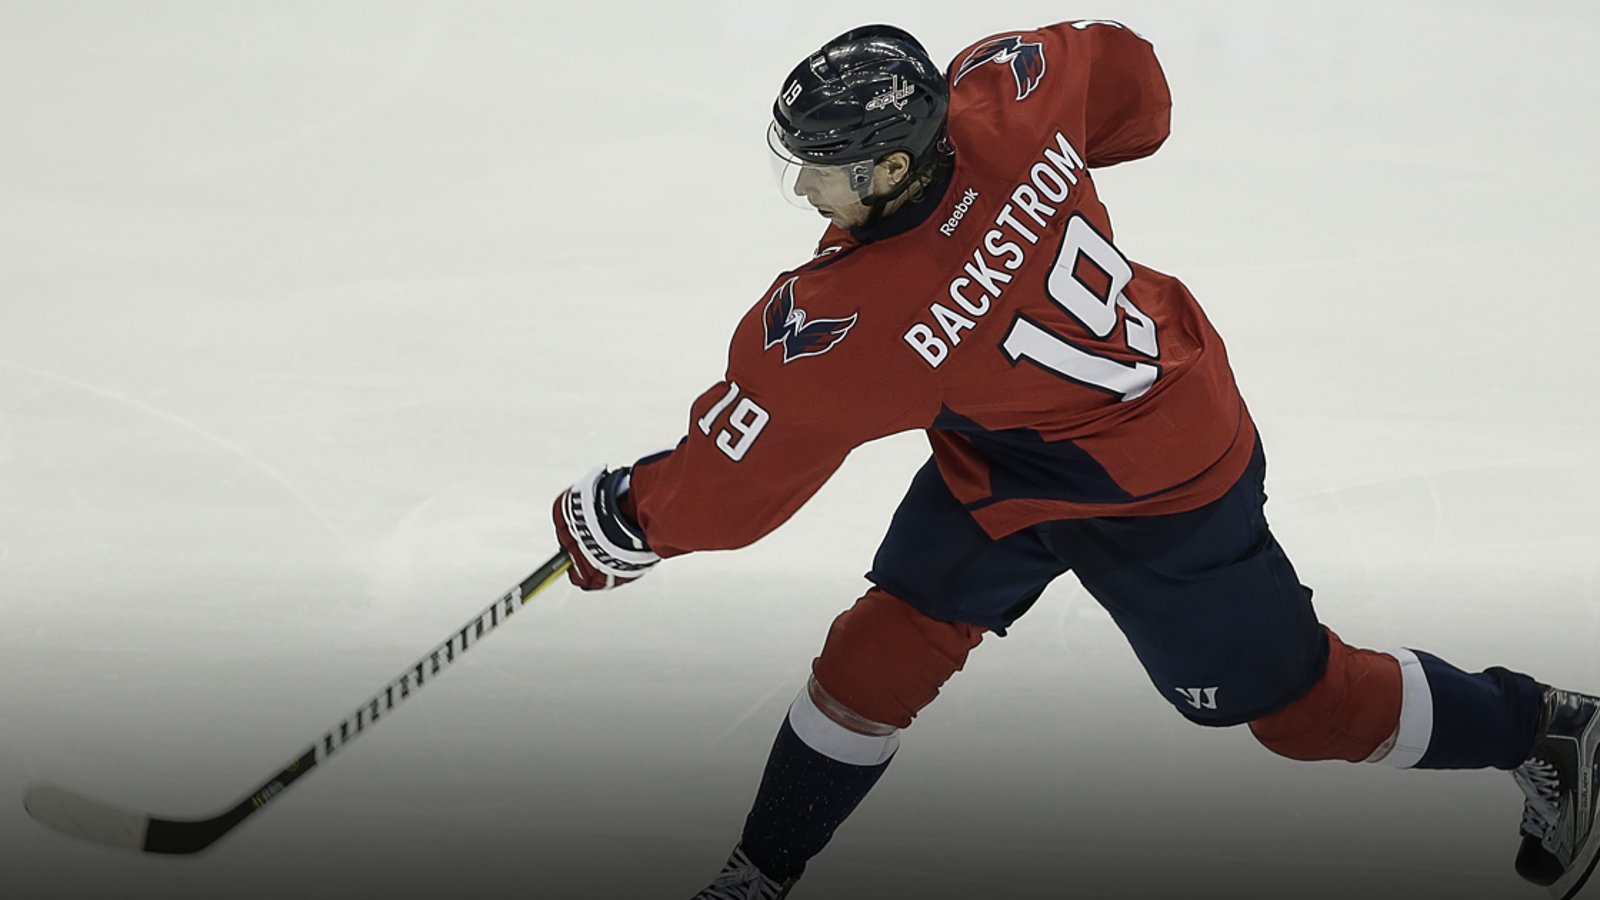 Report: Backstrom expected to play tonight